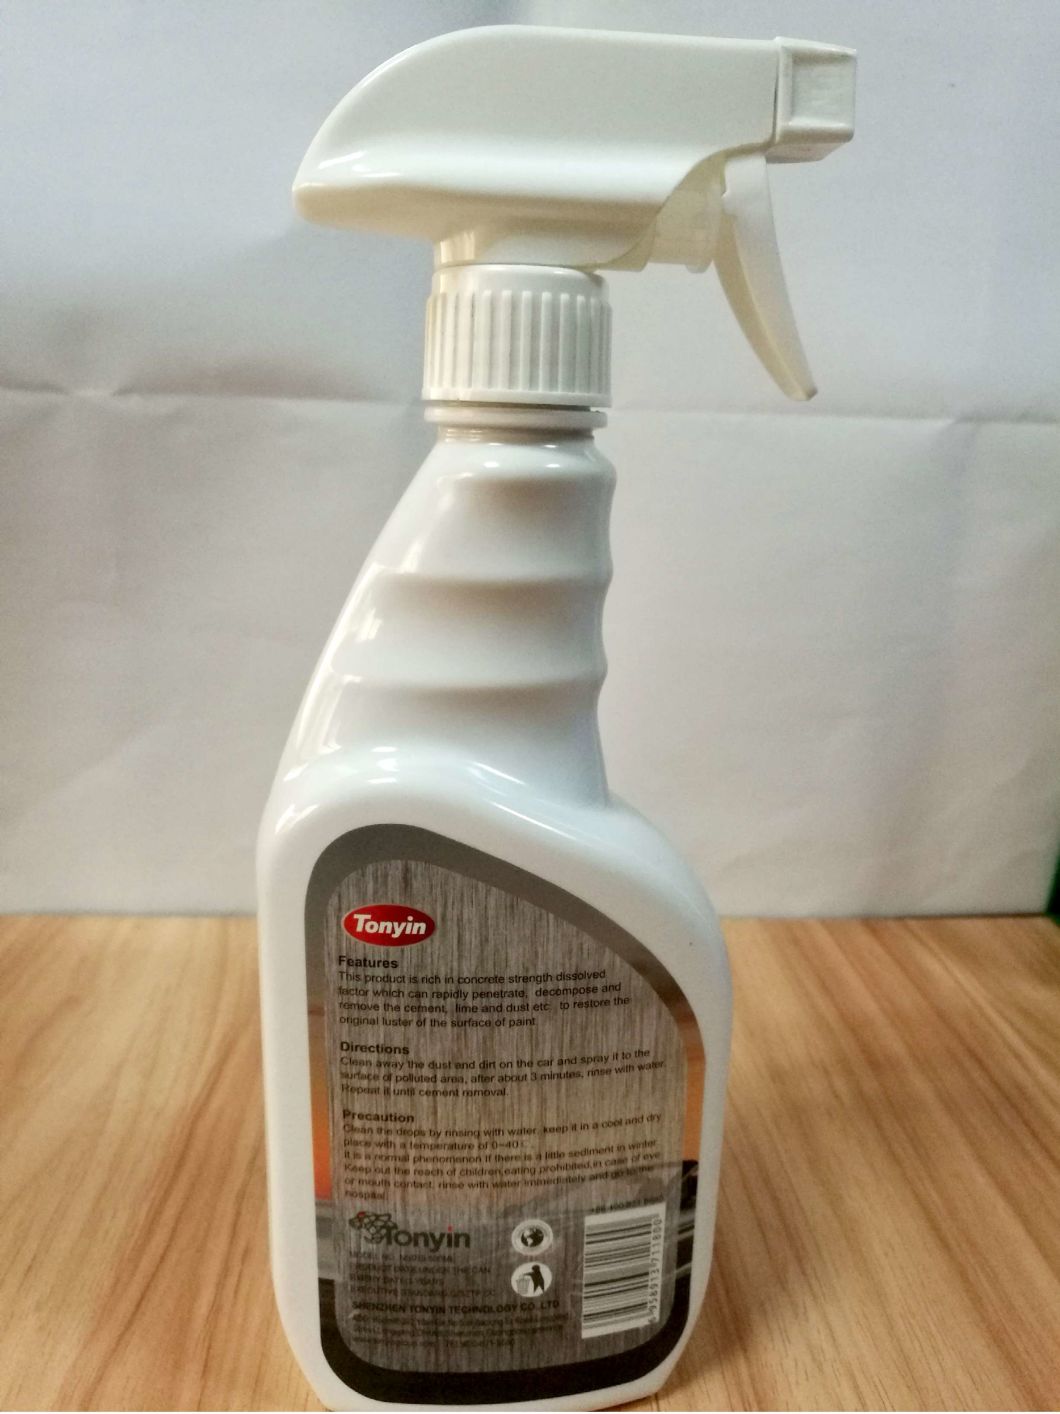 Auto Care Cement Cleaner, Concrete Cleaner for Car Care